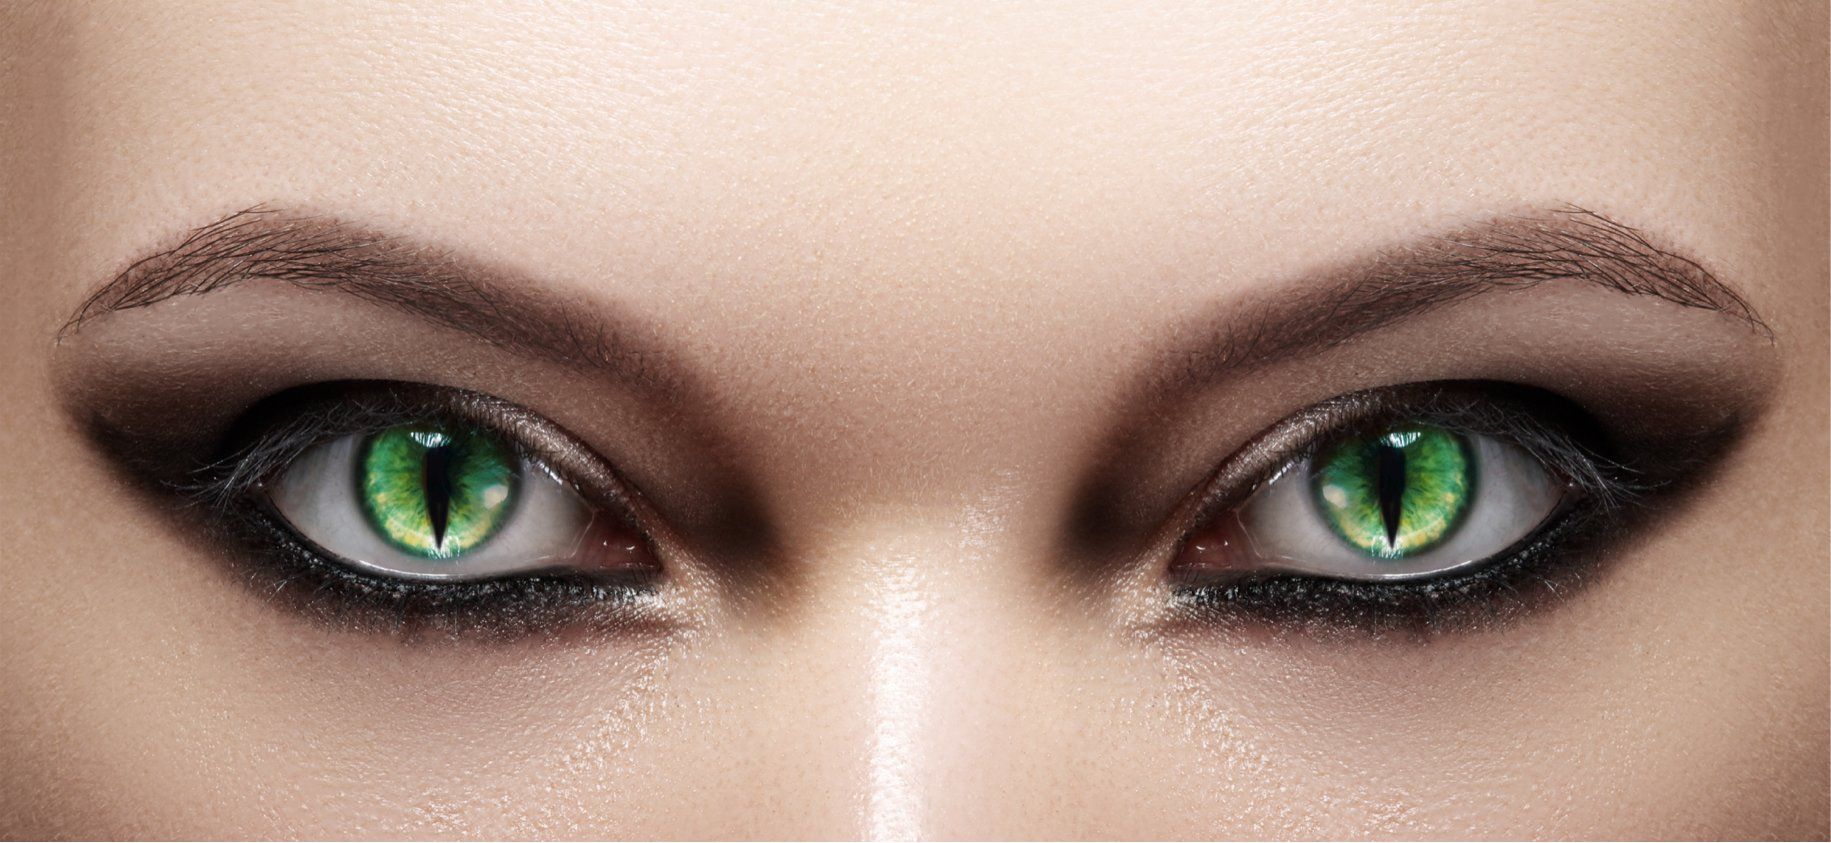 Woman wearing green cat eye theatrical contact lenses